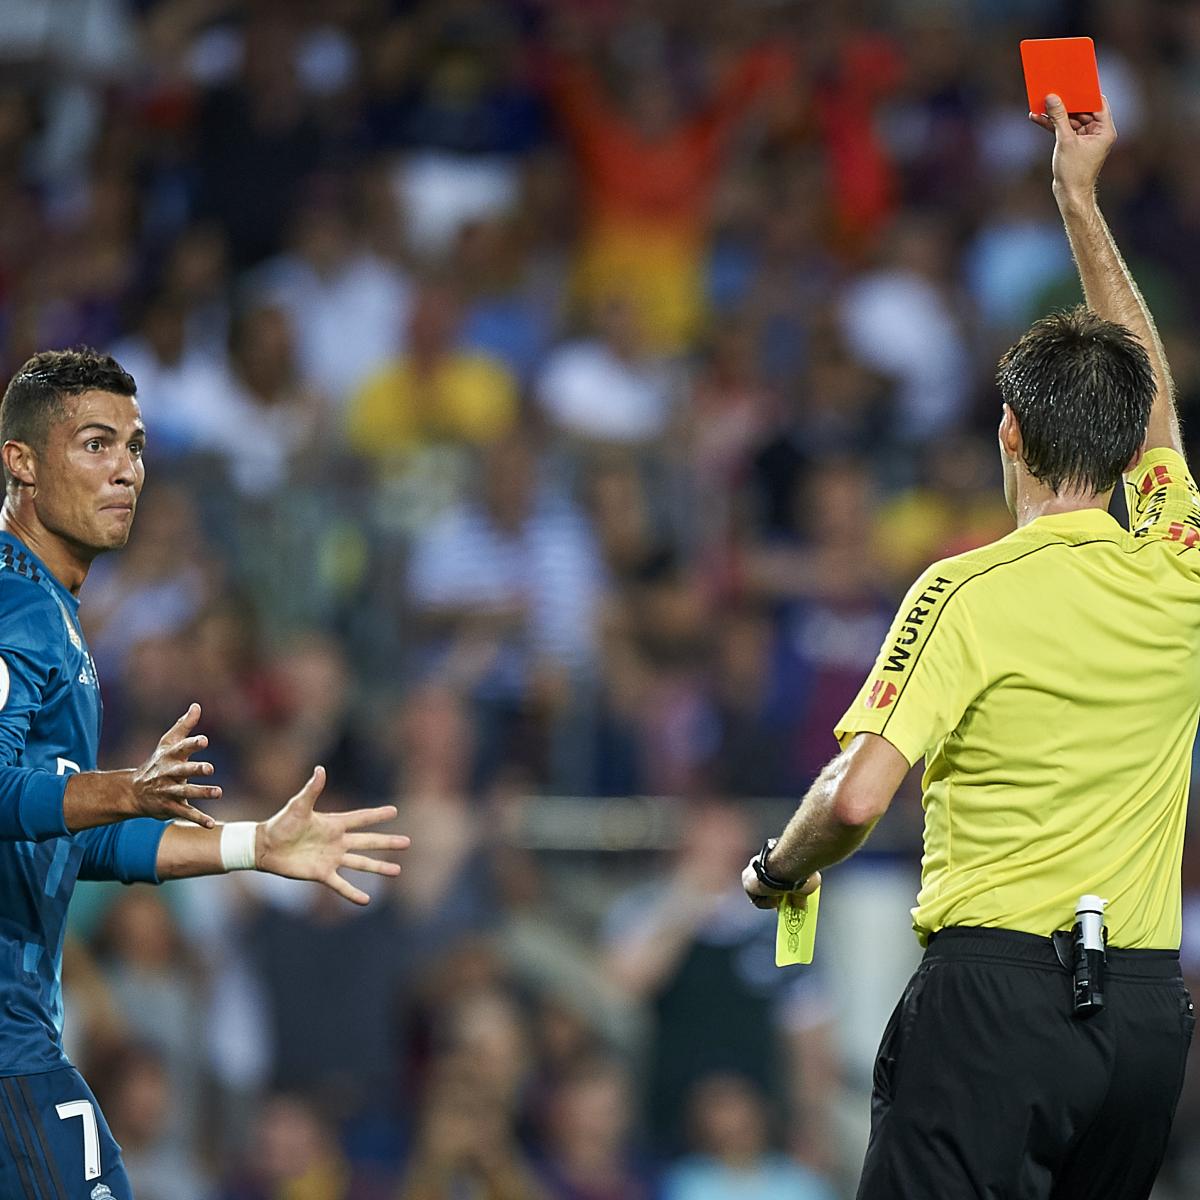 Cristiano Ronaldo Banned 5 After Shoving Official Following Red Card | News, Scores, Stats, and | Bleacher Report